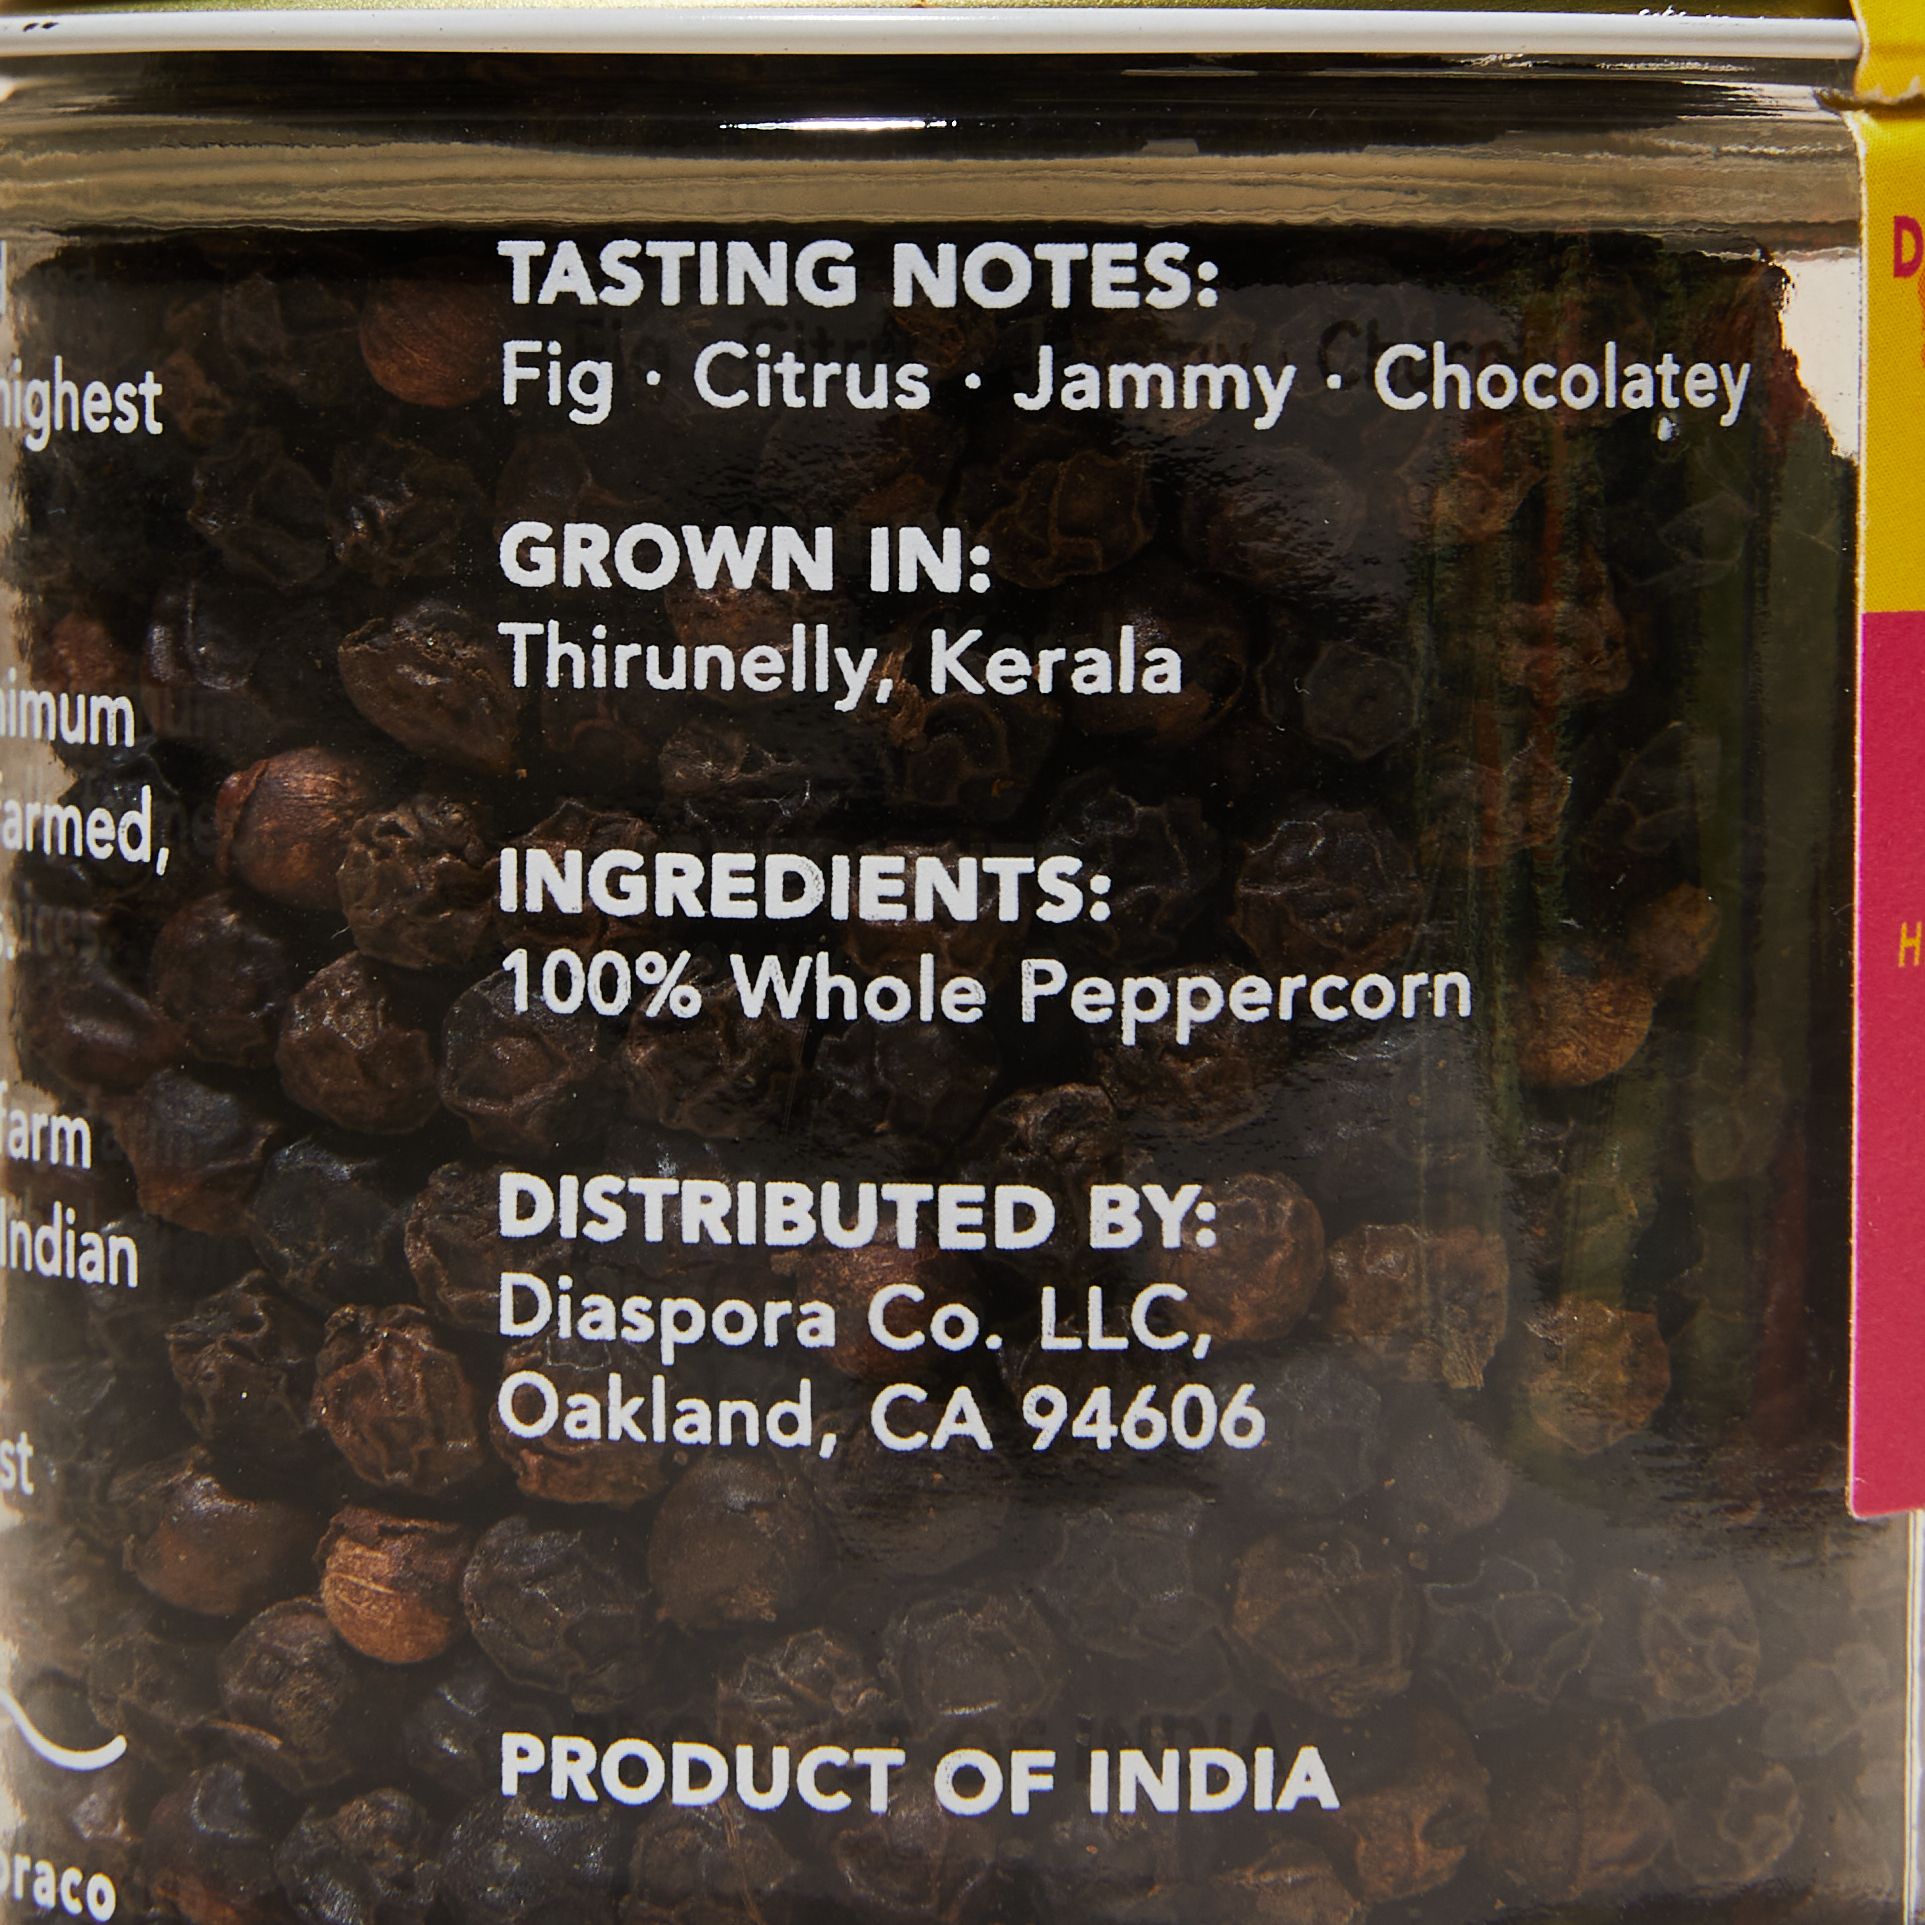 Label that shows tasting notes, place of origin, ingredients and name of company